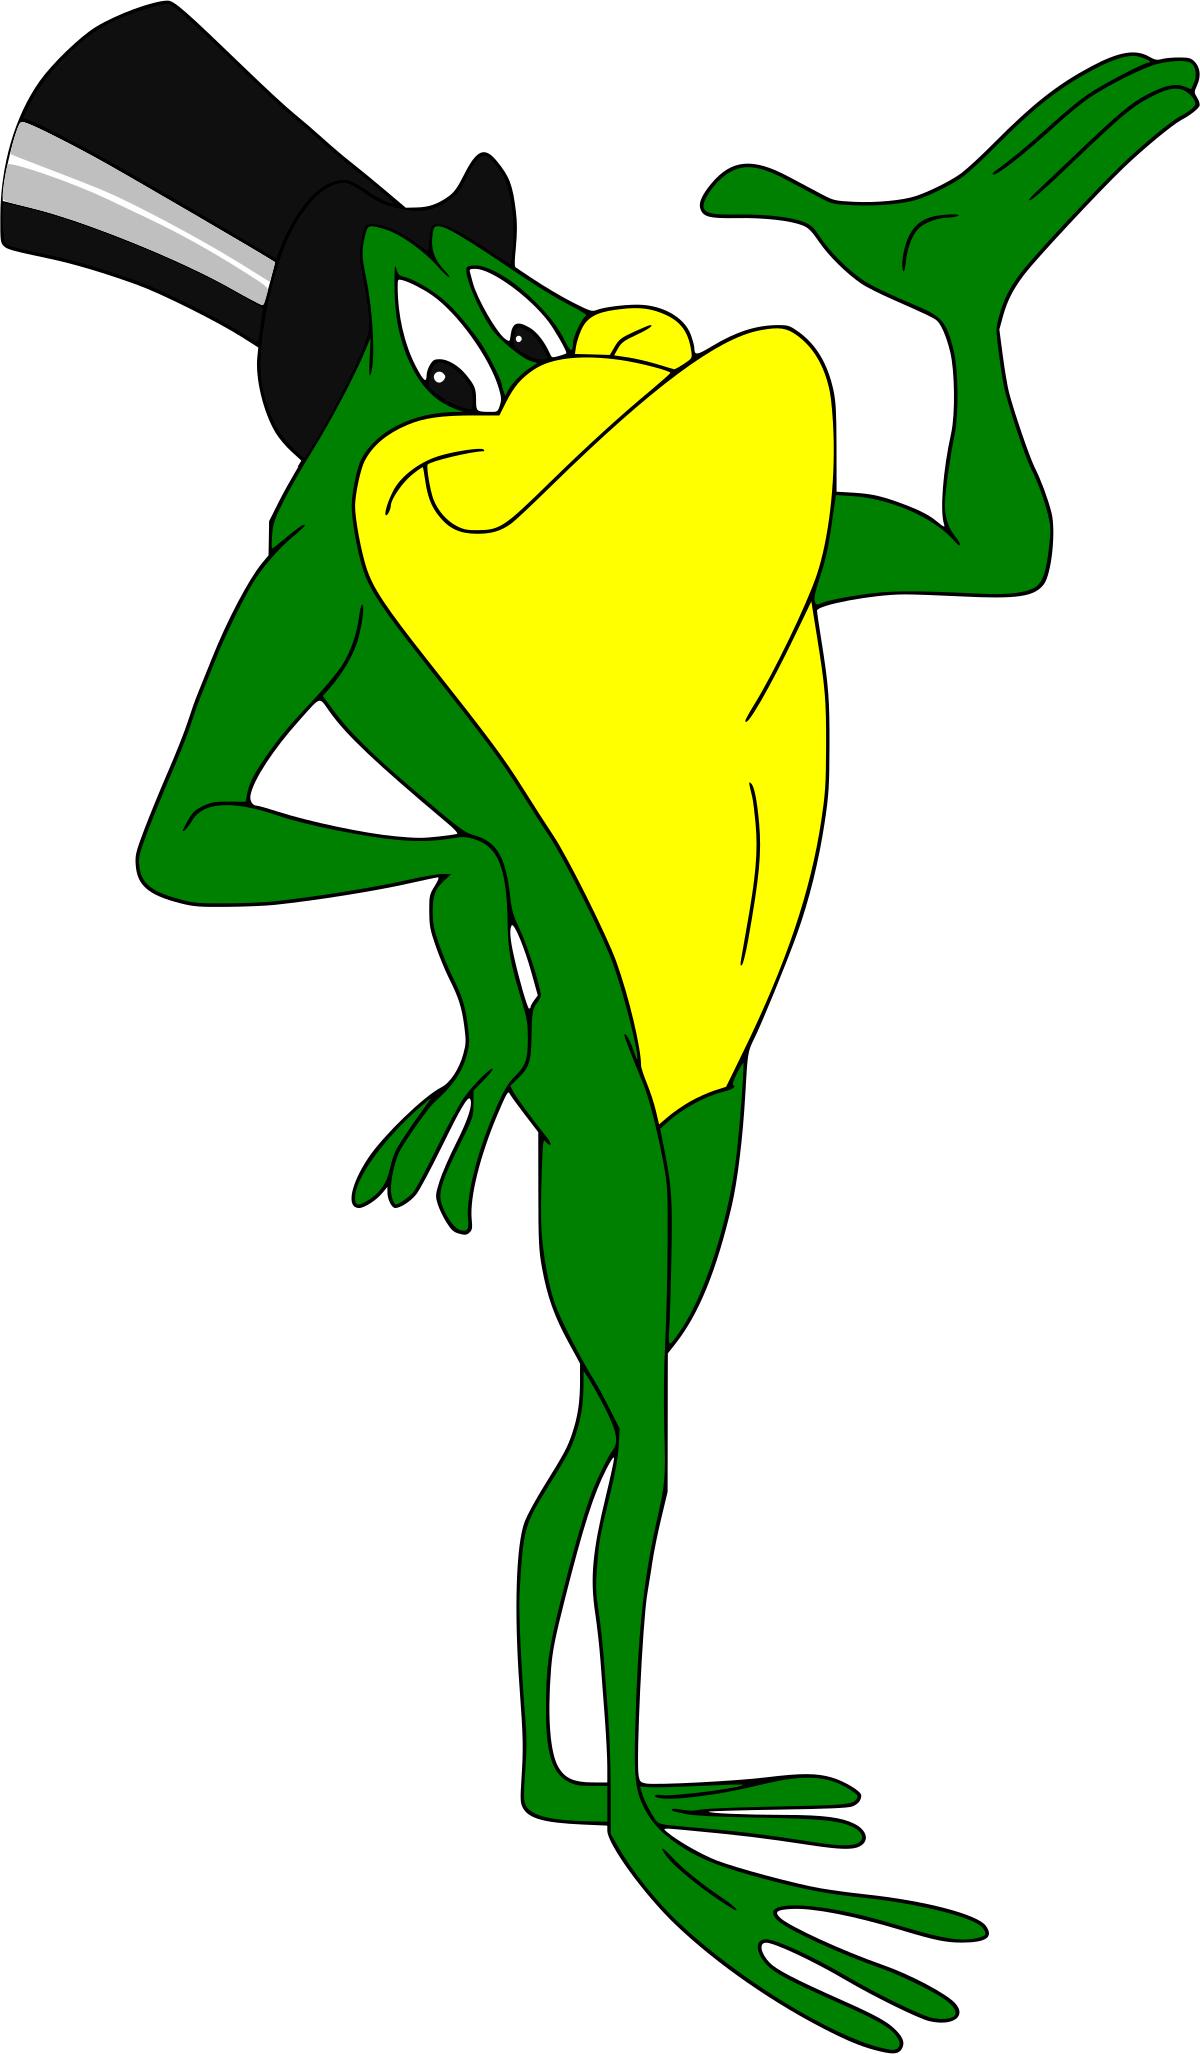 frogs-clipart-body-picture-1170953-frogs-clipart-body